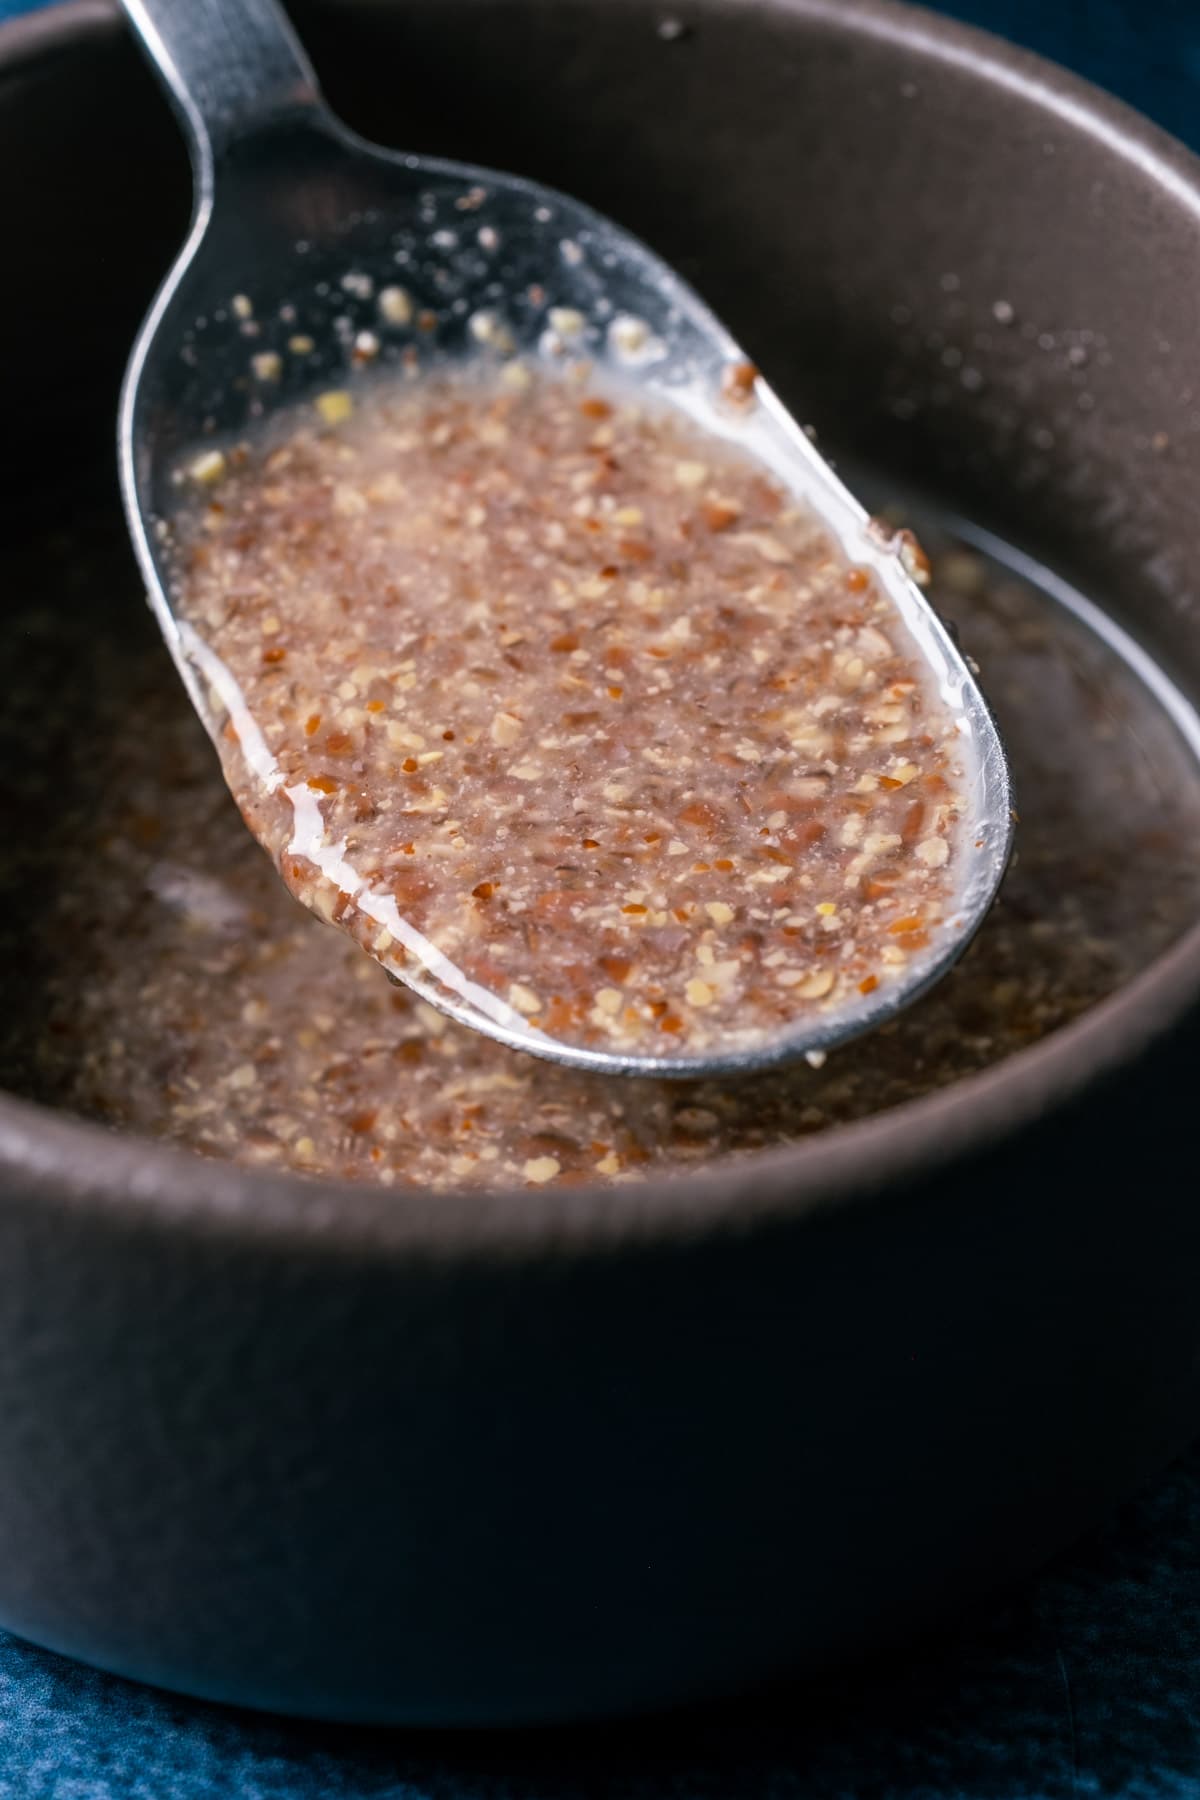 Flax egg in a bowl with a spoon.